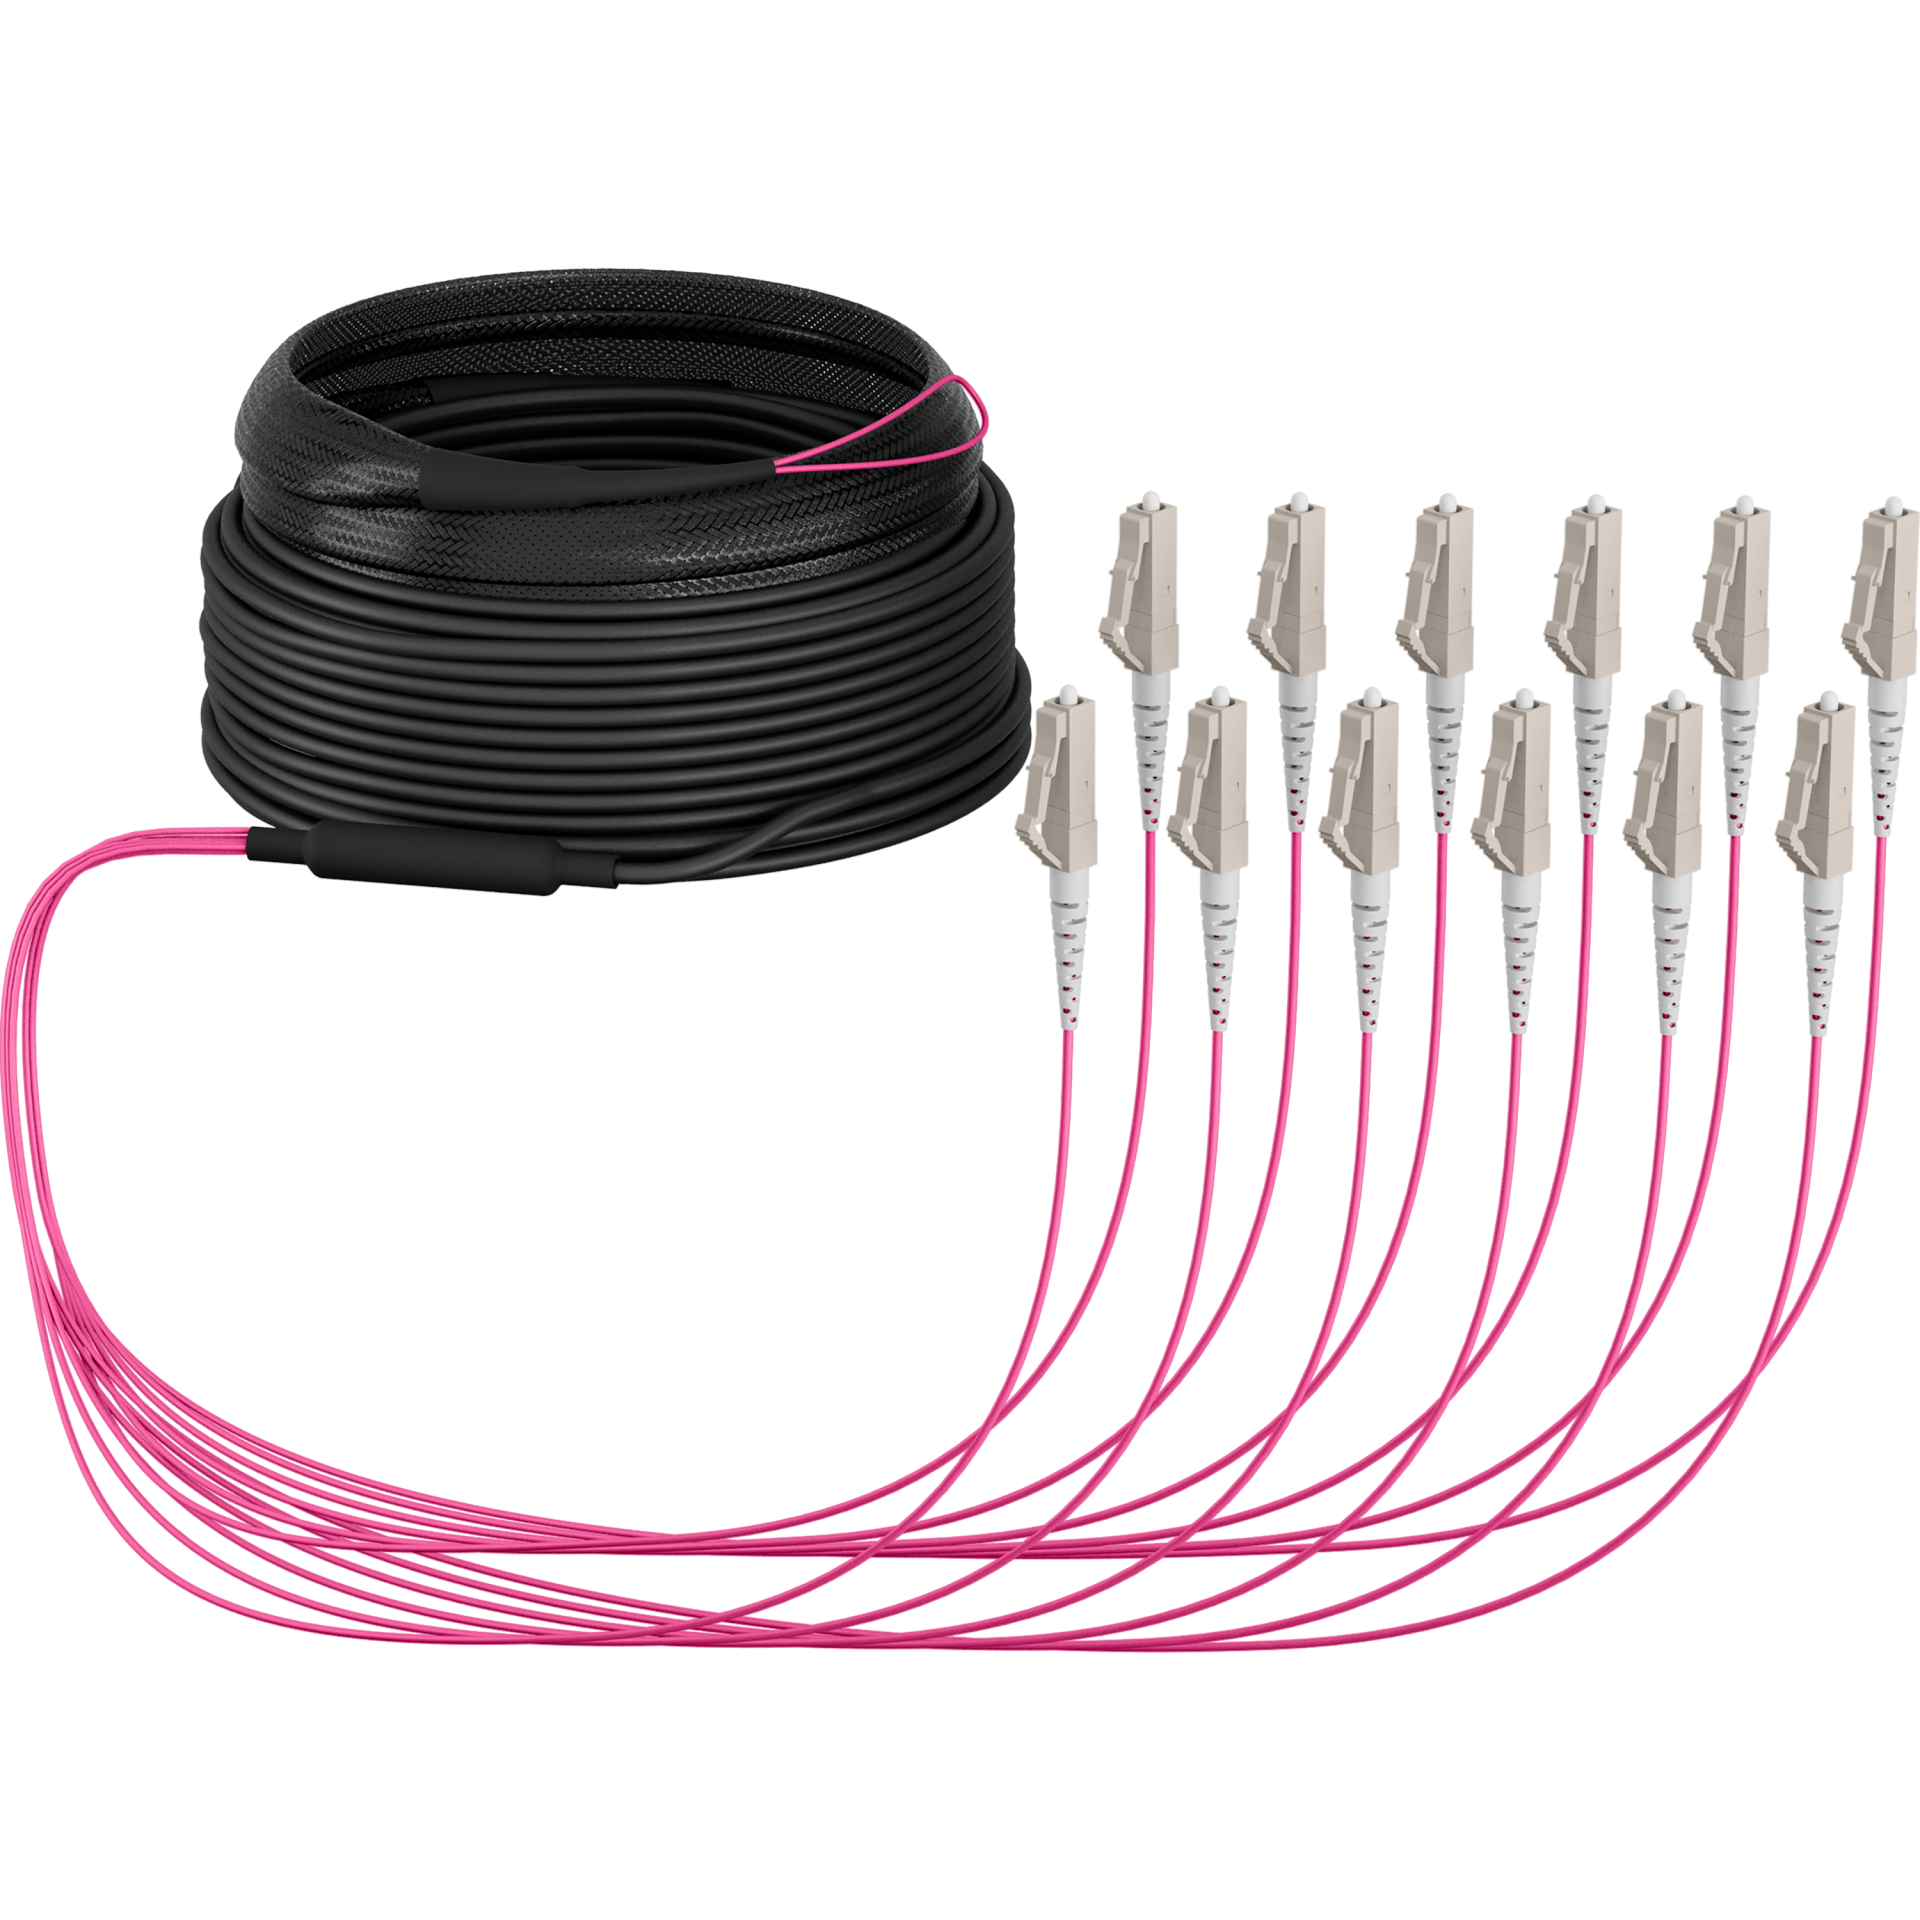 Trunkcable U-DQ(ZN)BH OM4 12G (1x12) LC-LC,20m Dca LSZH